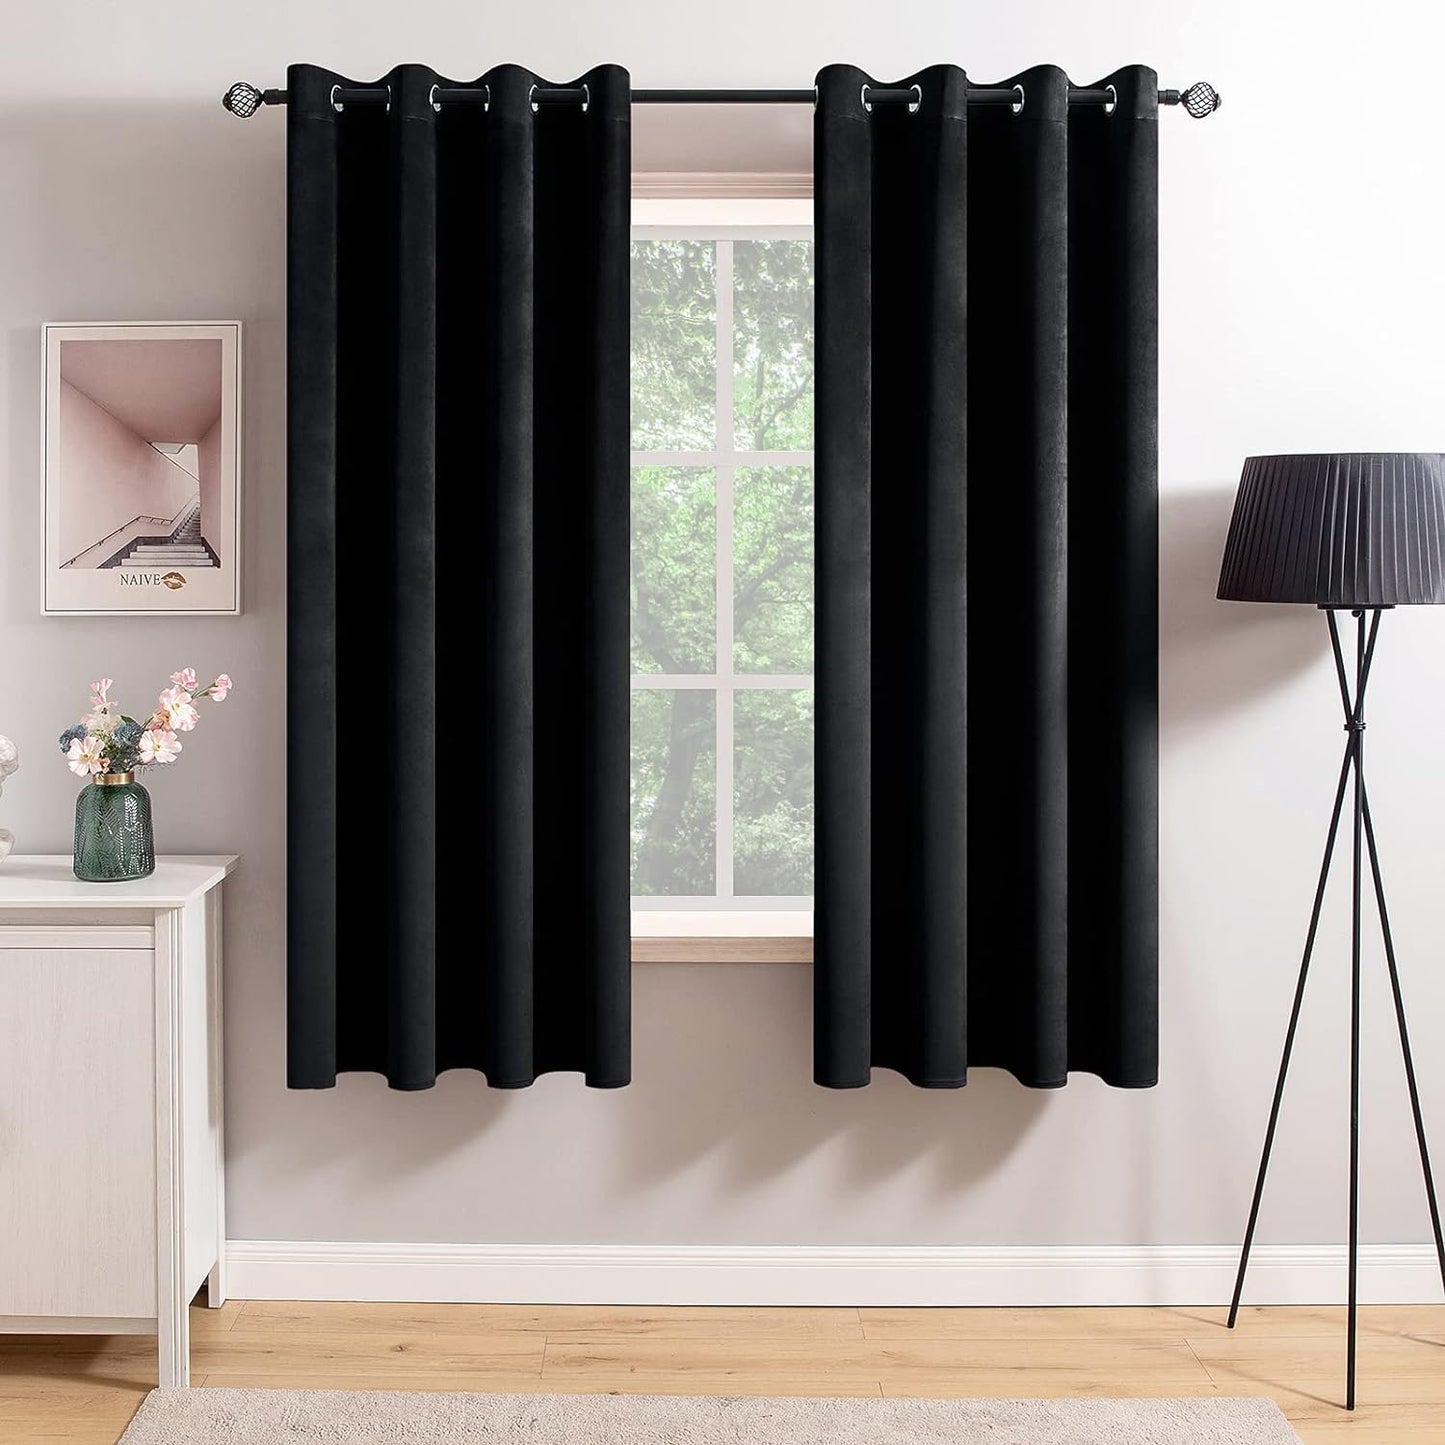 MIULEE Velvet Curtains Olive Green Elegant Grommet Curtains Thermal Insulated Soundproof Room Darkening Curtains/Drapes for Classical Living Room Bedroom Decor 52 X 84 Inch Set of 2  MIULEE Black W52 X L63 